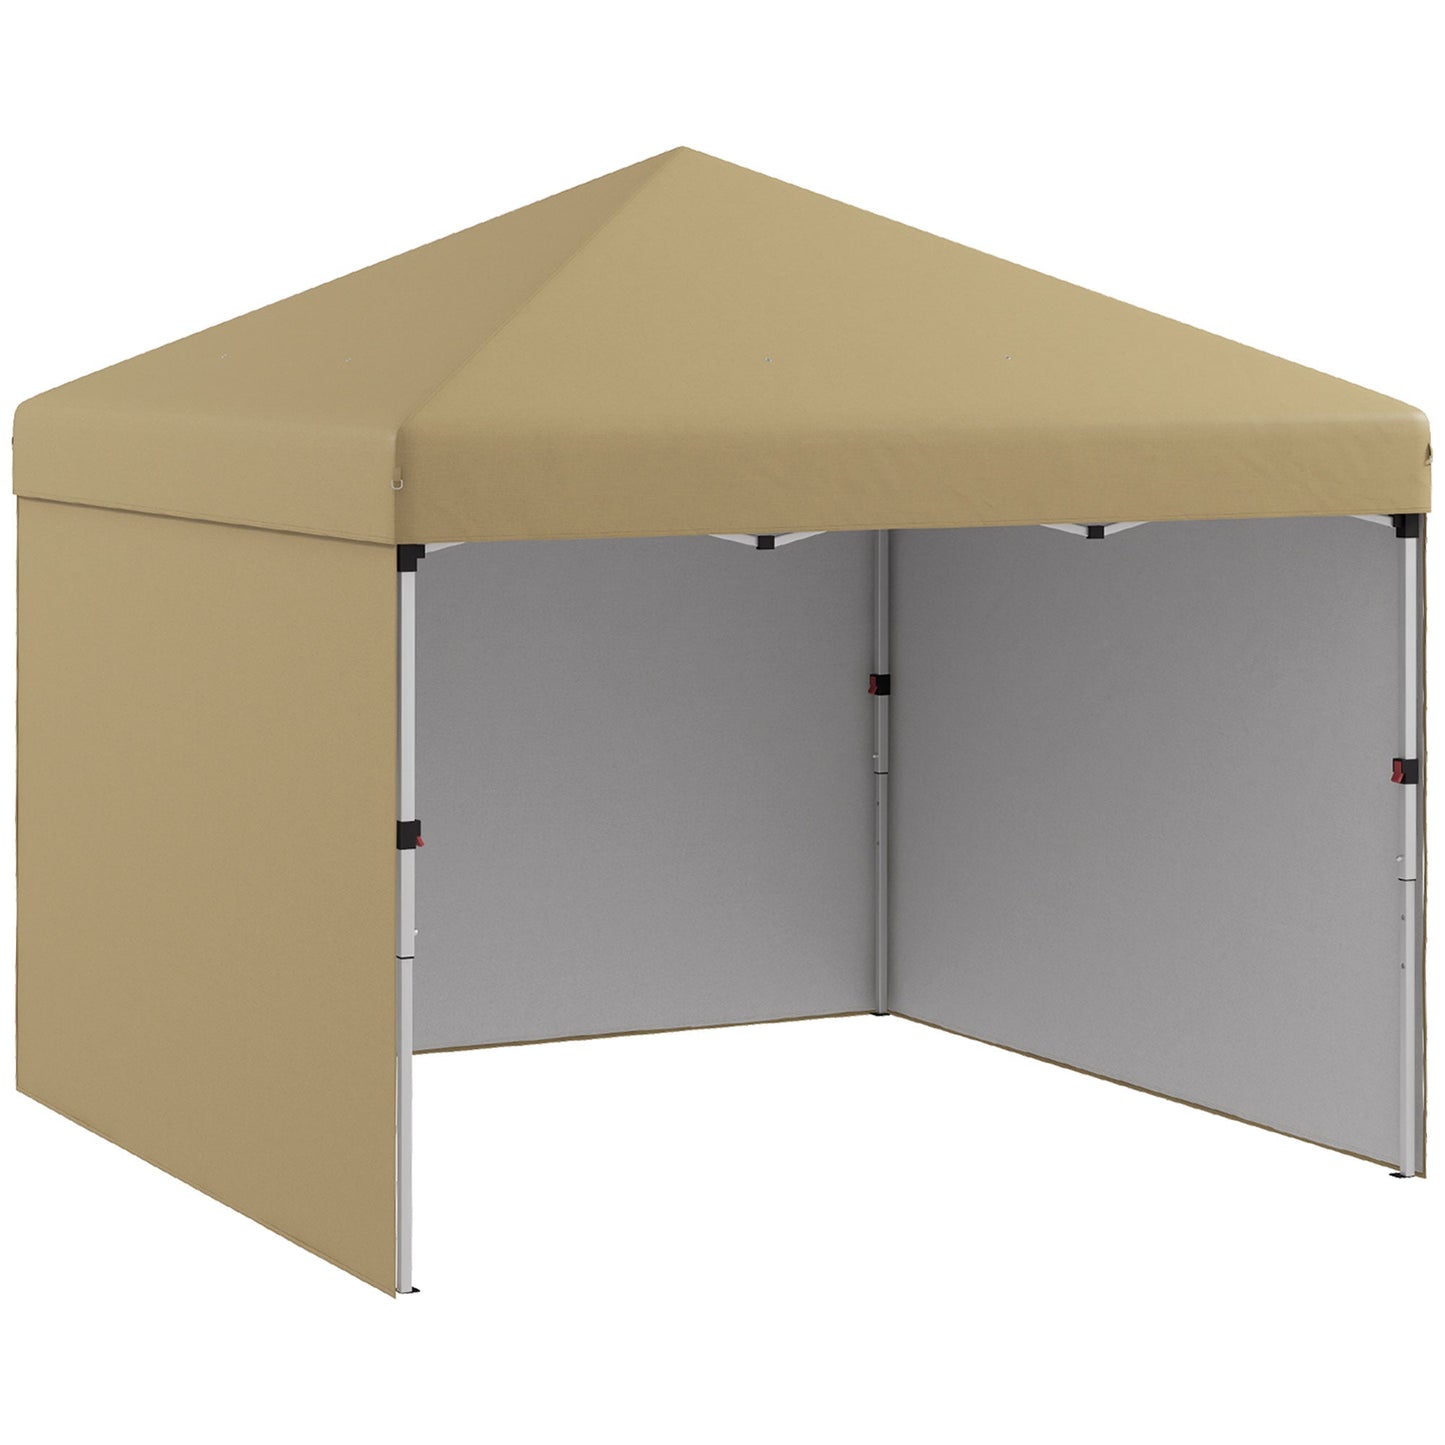 -Outsunny 10 x 10ft Pop Up Canopy with Sidewalls, Weight Bags and Carry Bag, Height Adjustable Tents for Parties - Outdoor Style Company